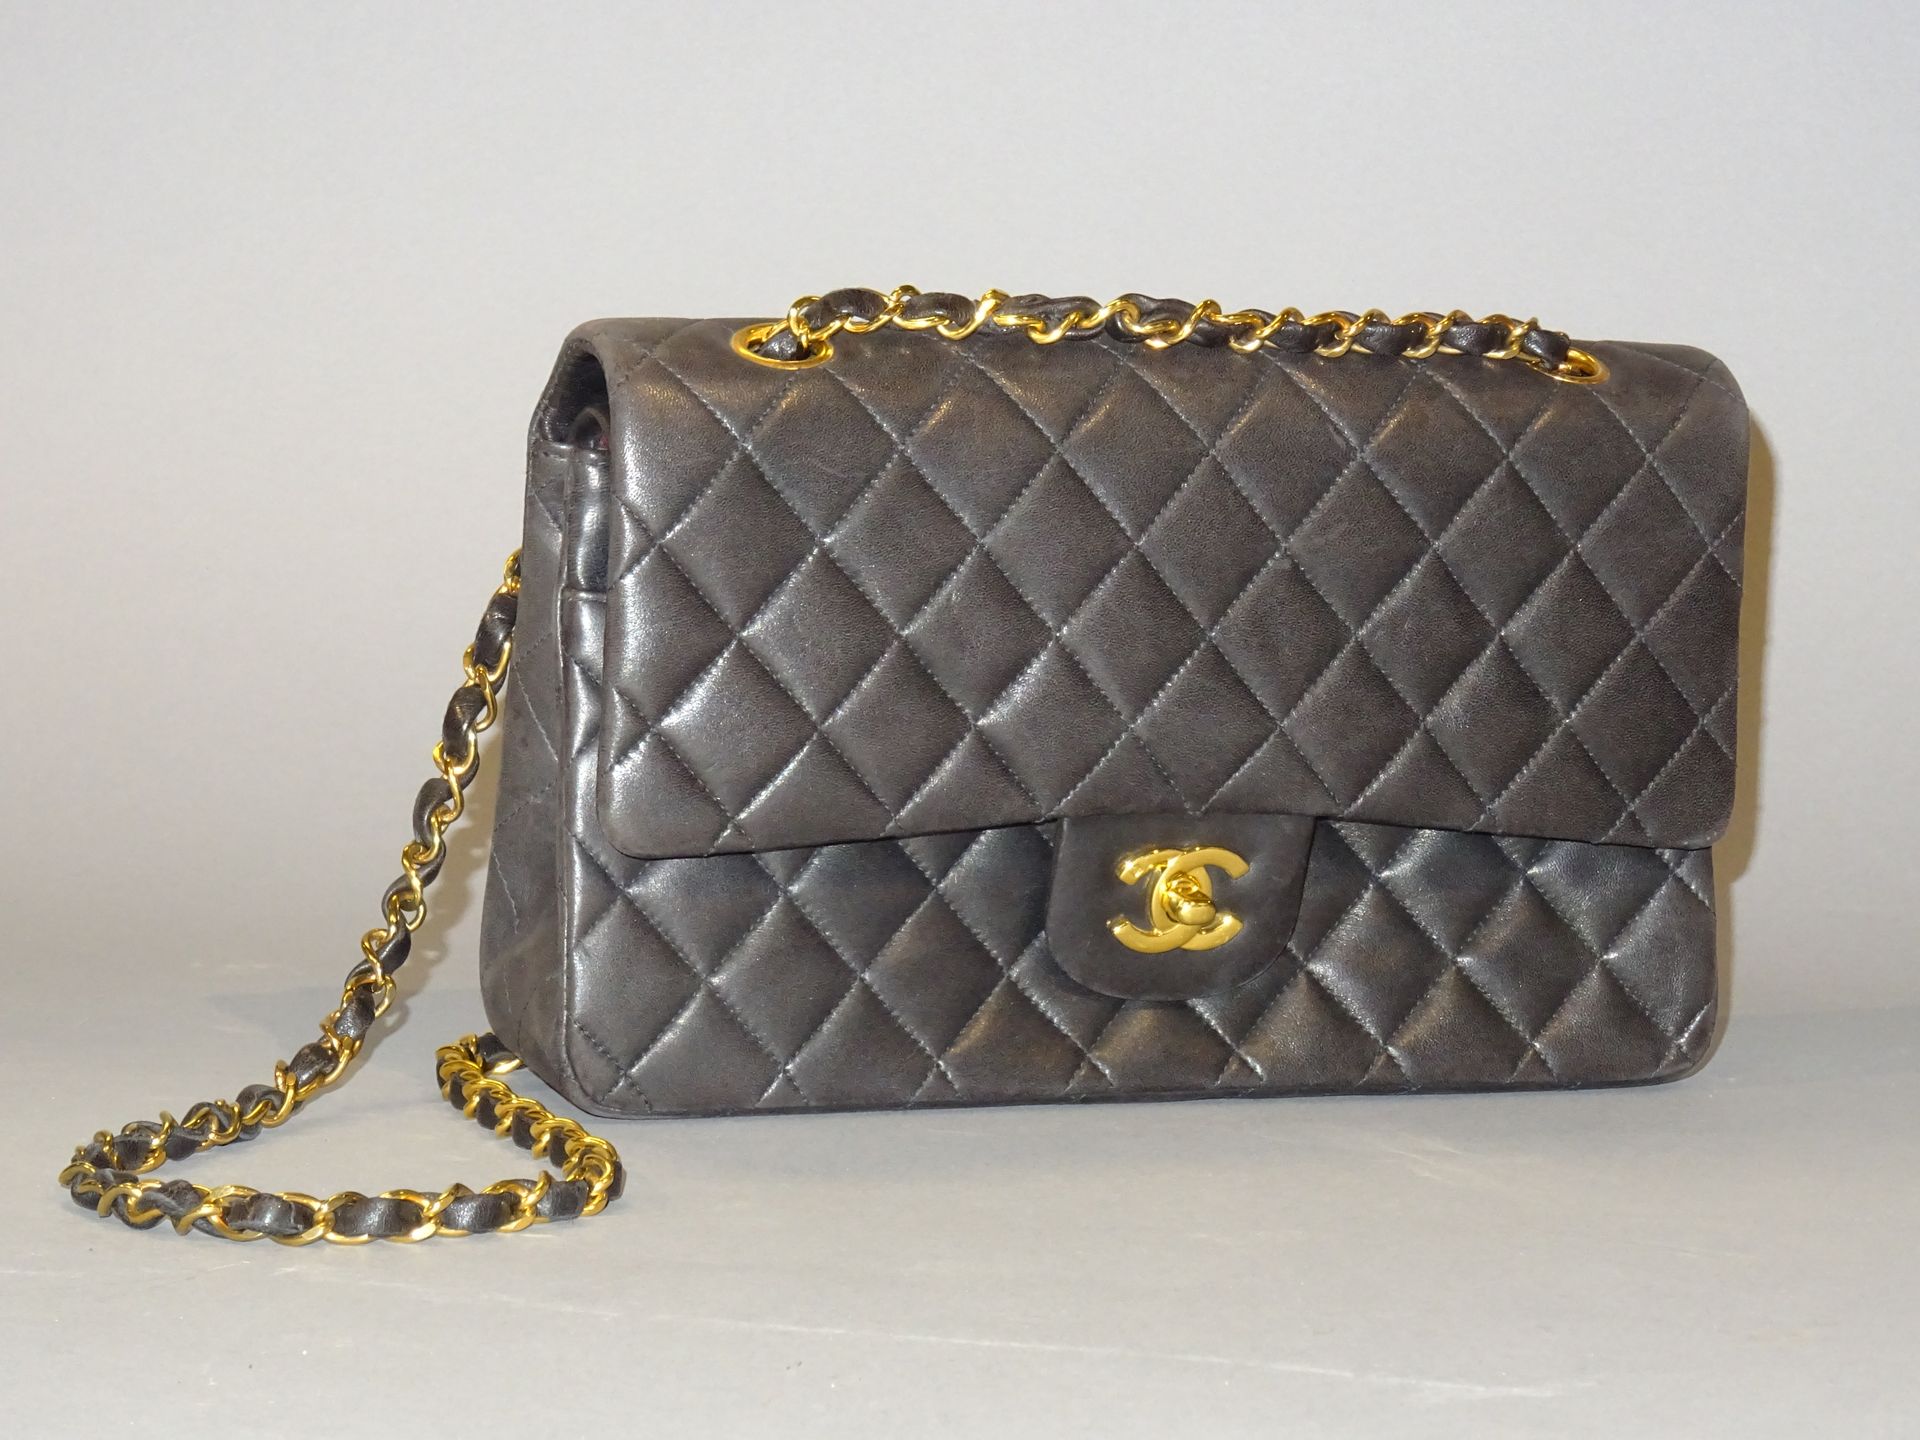 CHANEL : Black quilted leather bag with braided leather …